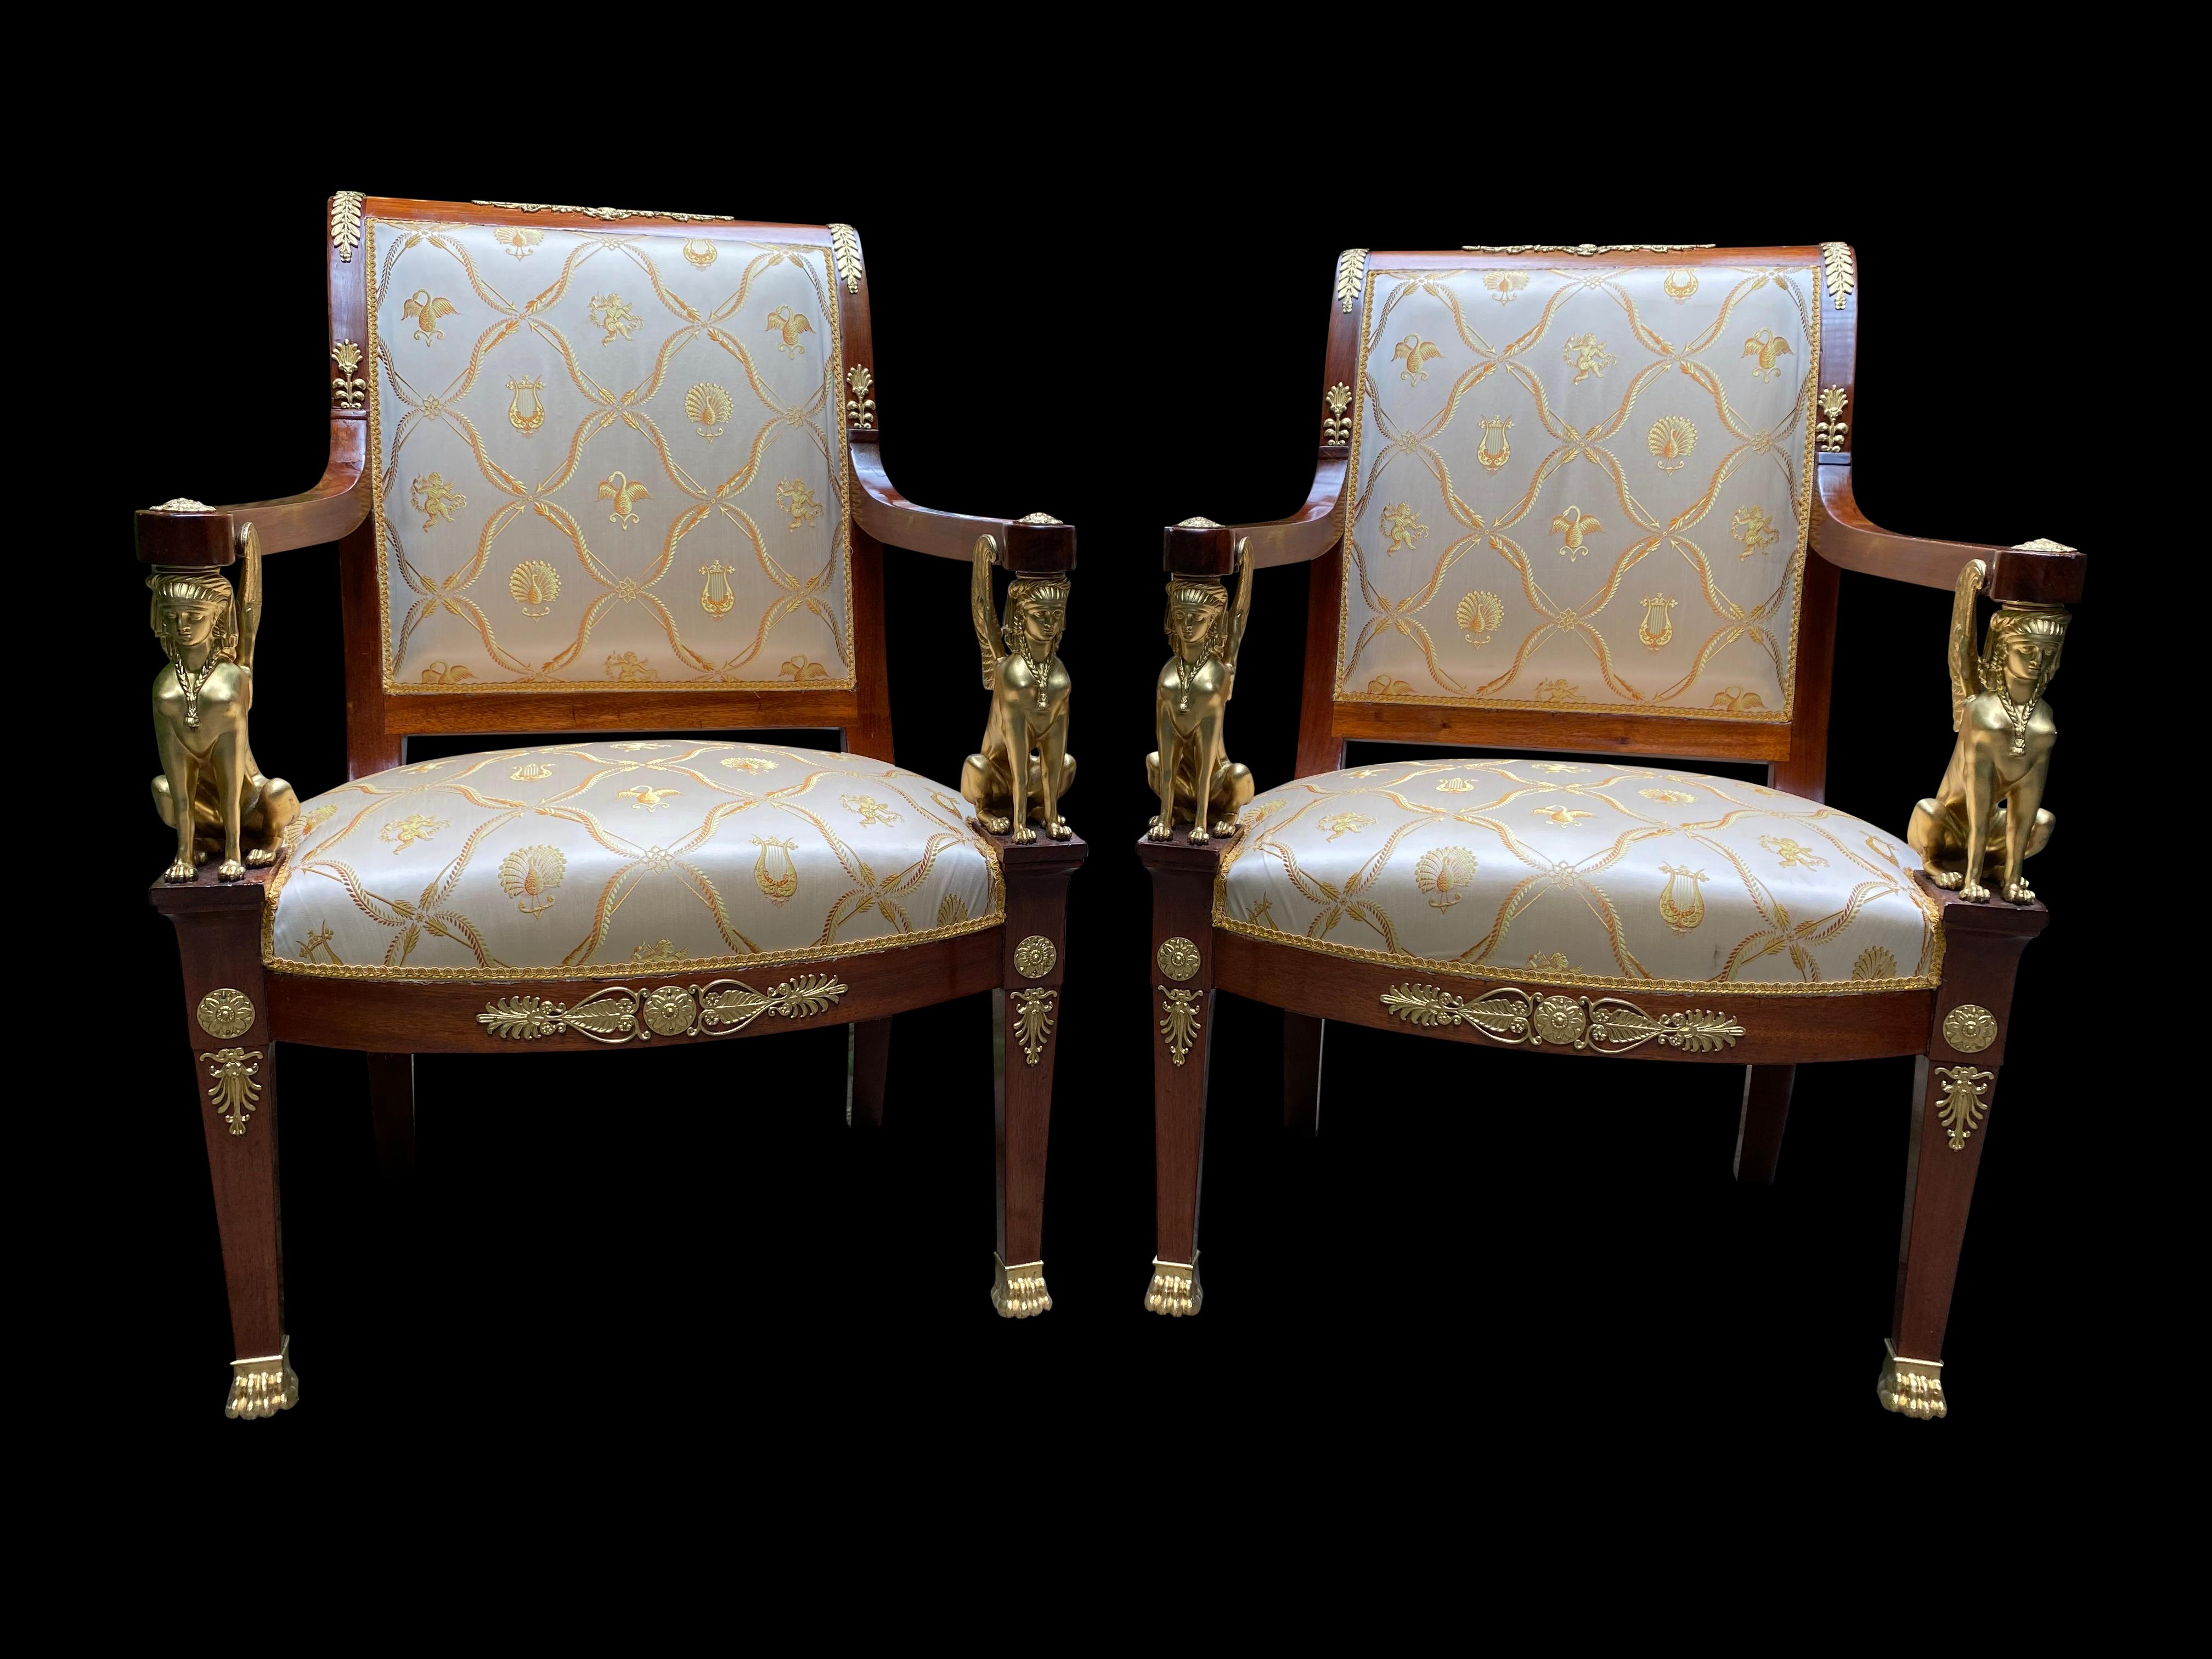 A stunning pair of French Empire armchairs with bronze mounts, 19th century. Napoleon III style mahogany armchairs with ormolu mounts, lion gilt paw feet, arms rest on seated sphinx gilt bronze supports. White and gold silk upholstery with classical